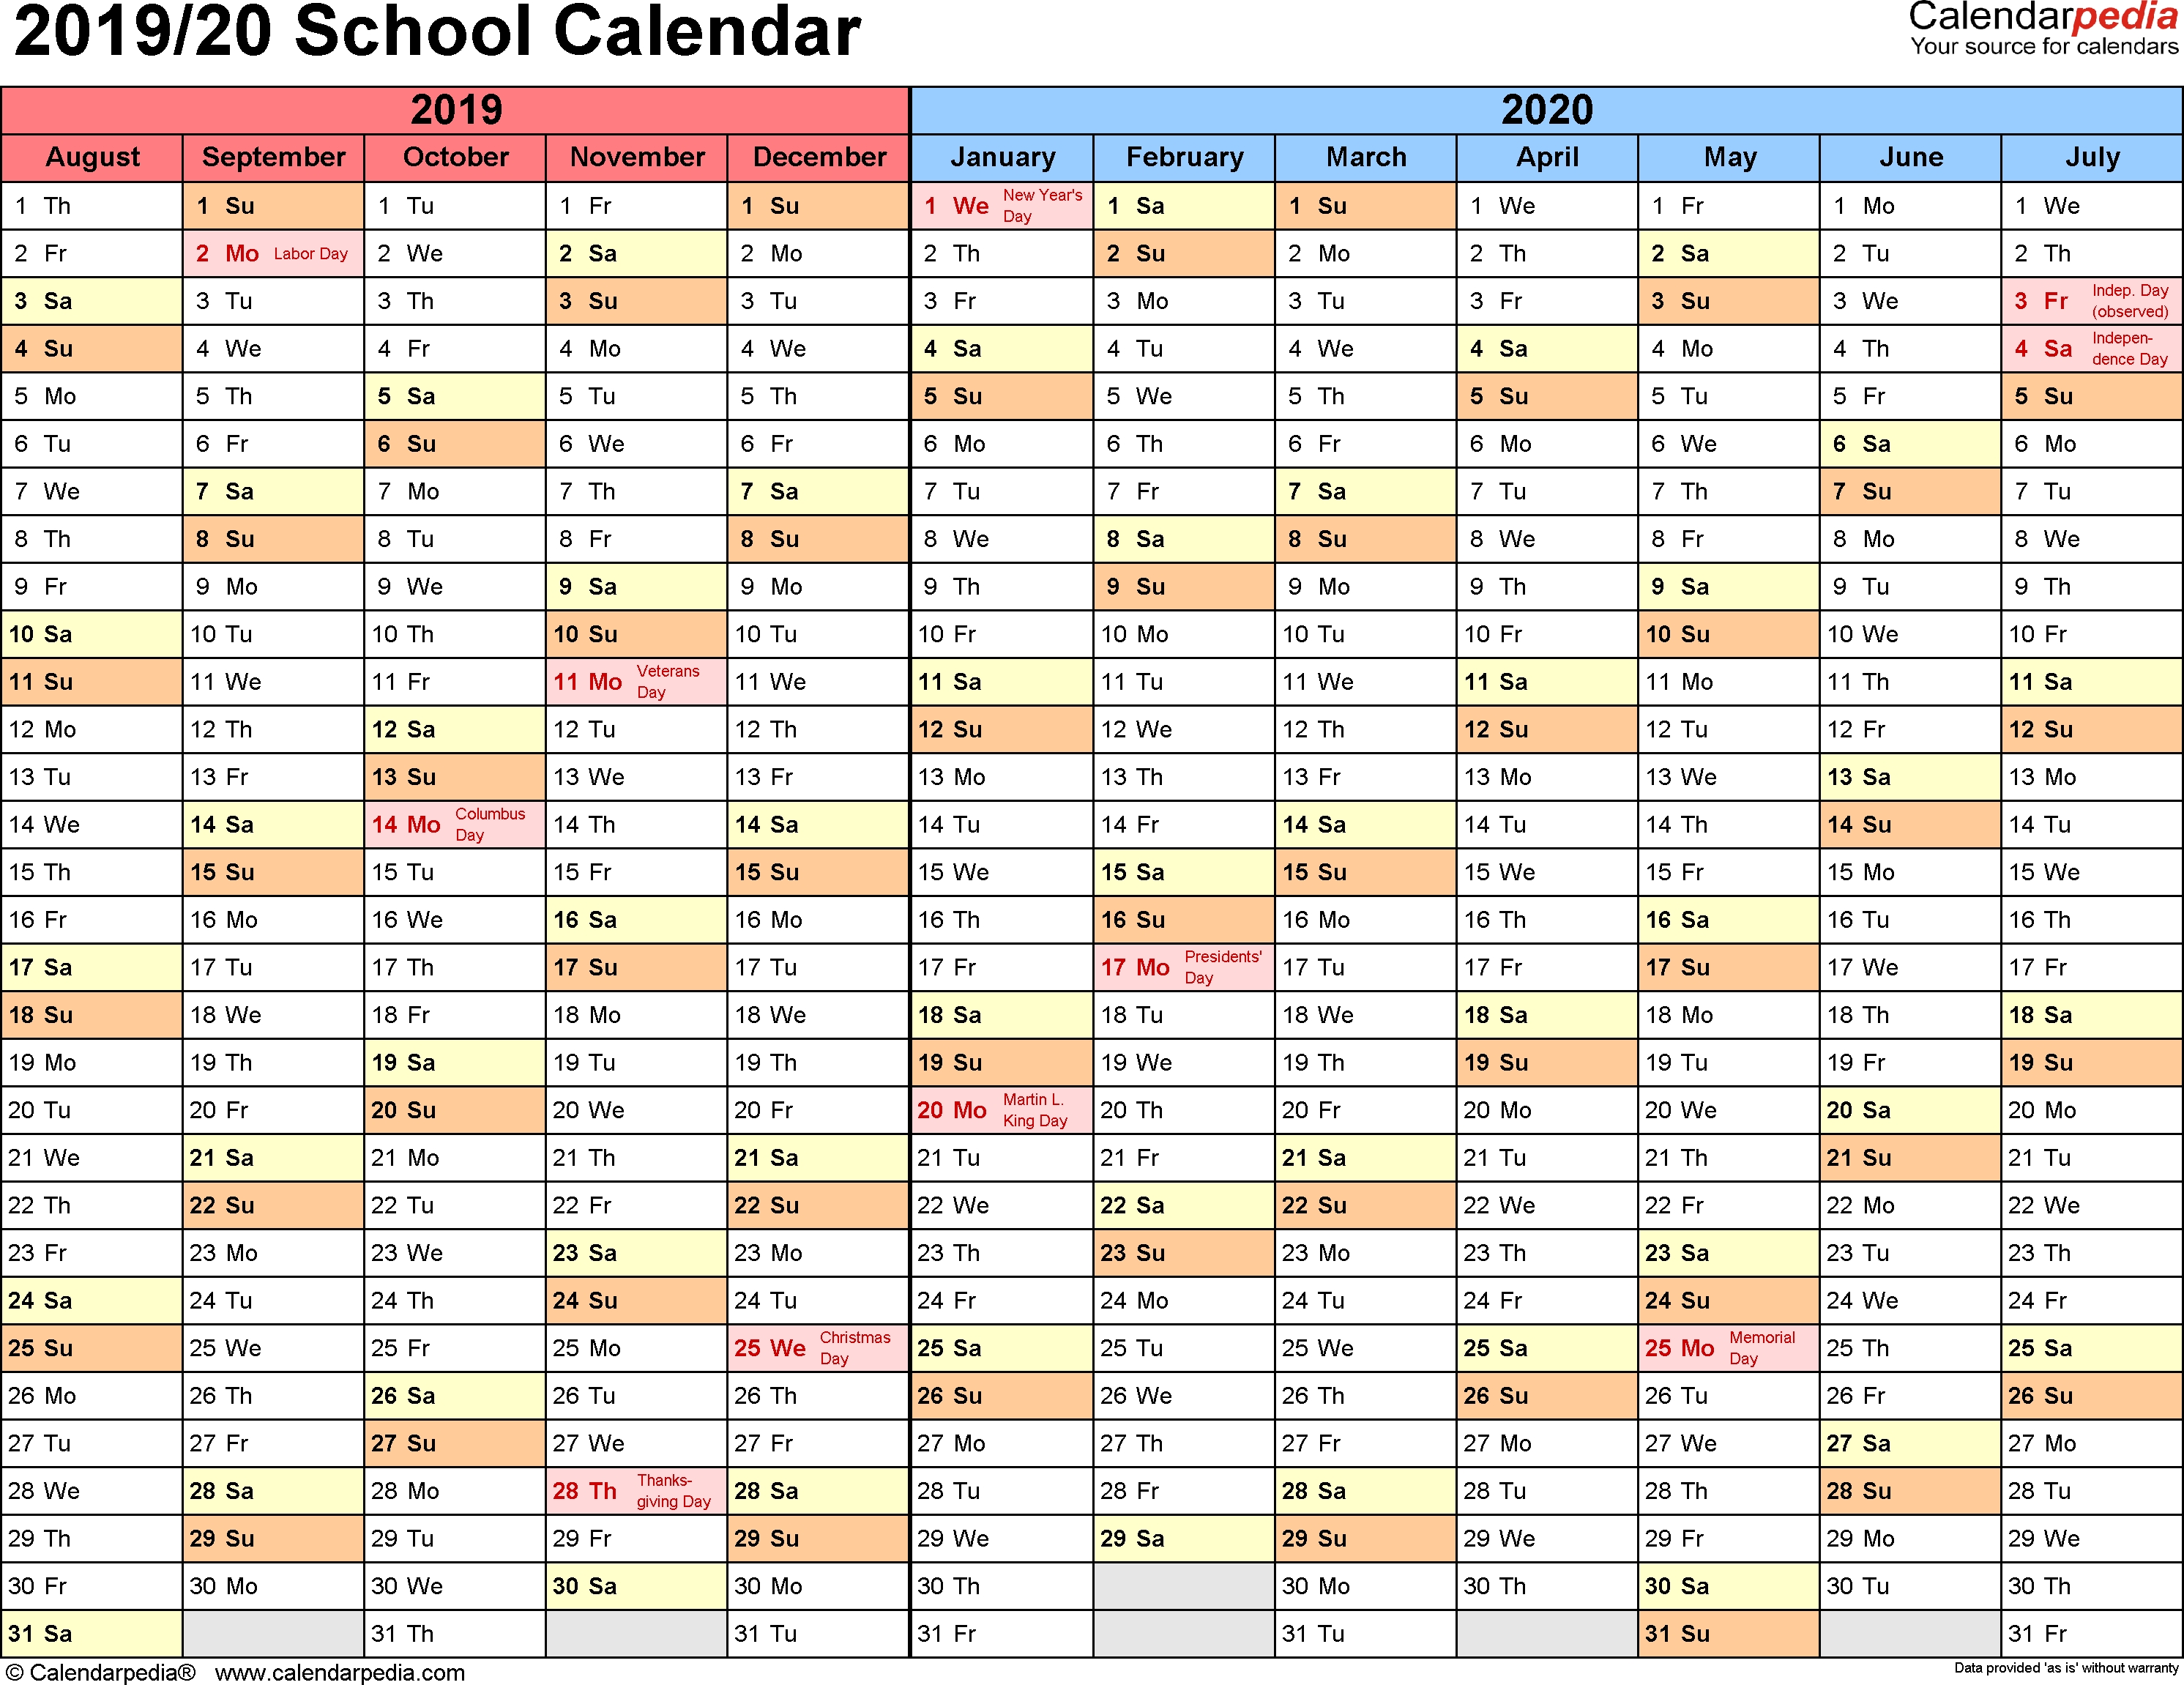 School Calendars 2019/2020 As Free Printable Excel Templates-2020 Calendar South Africa With Public Holidays And School Terms